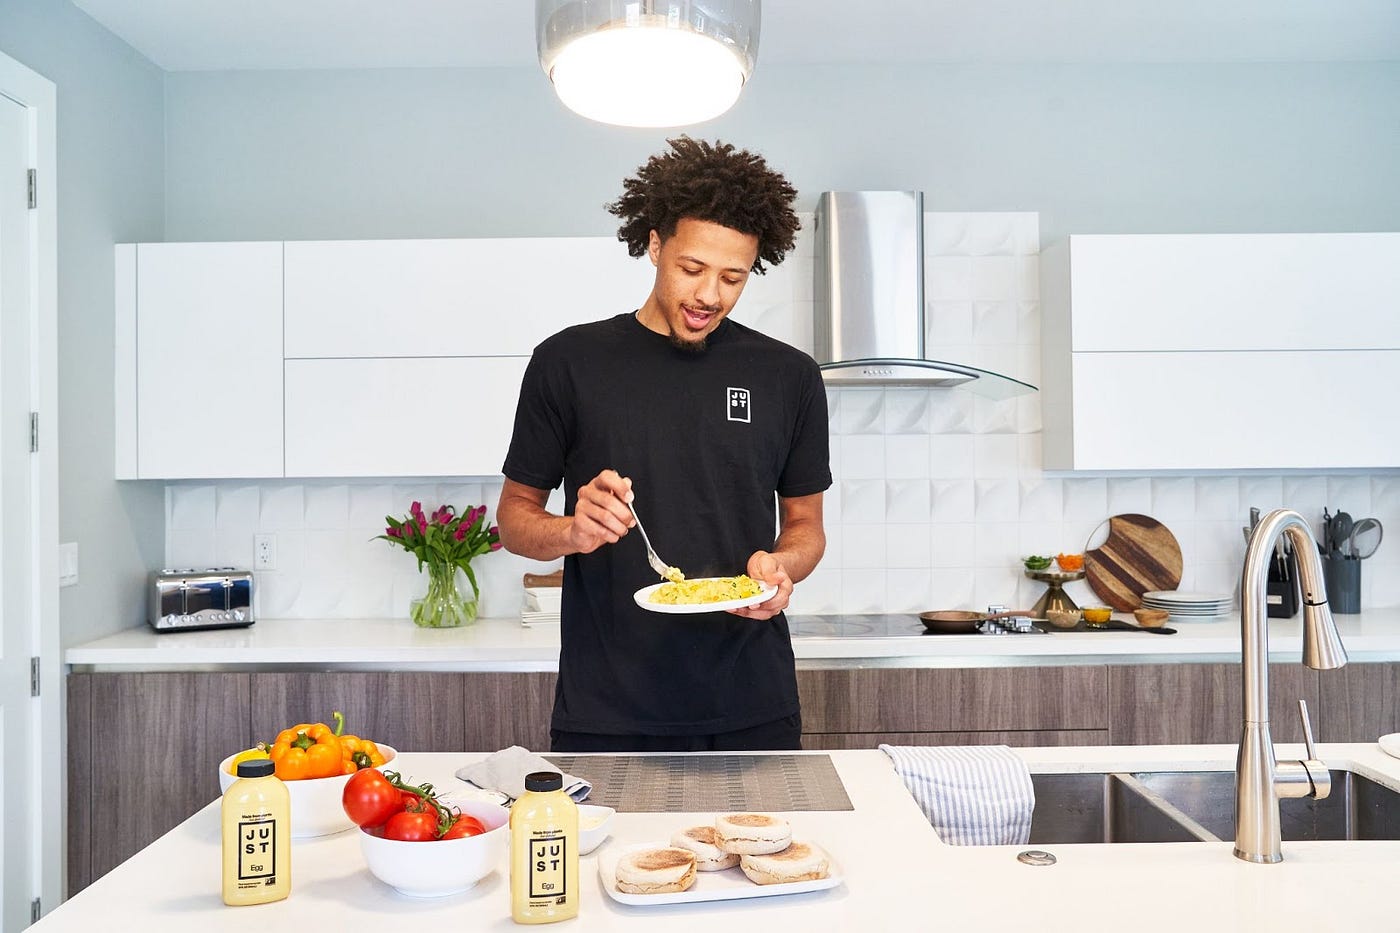 The NBA's First Draft Pick Cade Cunningham Is Headed to the Detroit  Pistons. And He's Taking Vegan Eggs With Him.